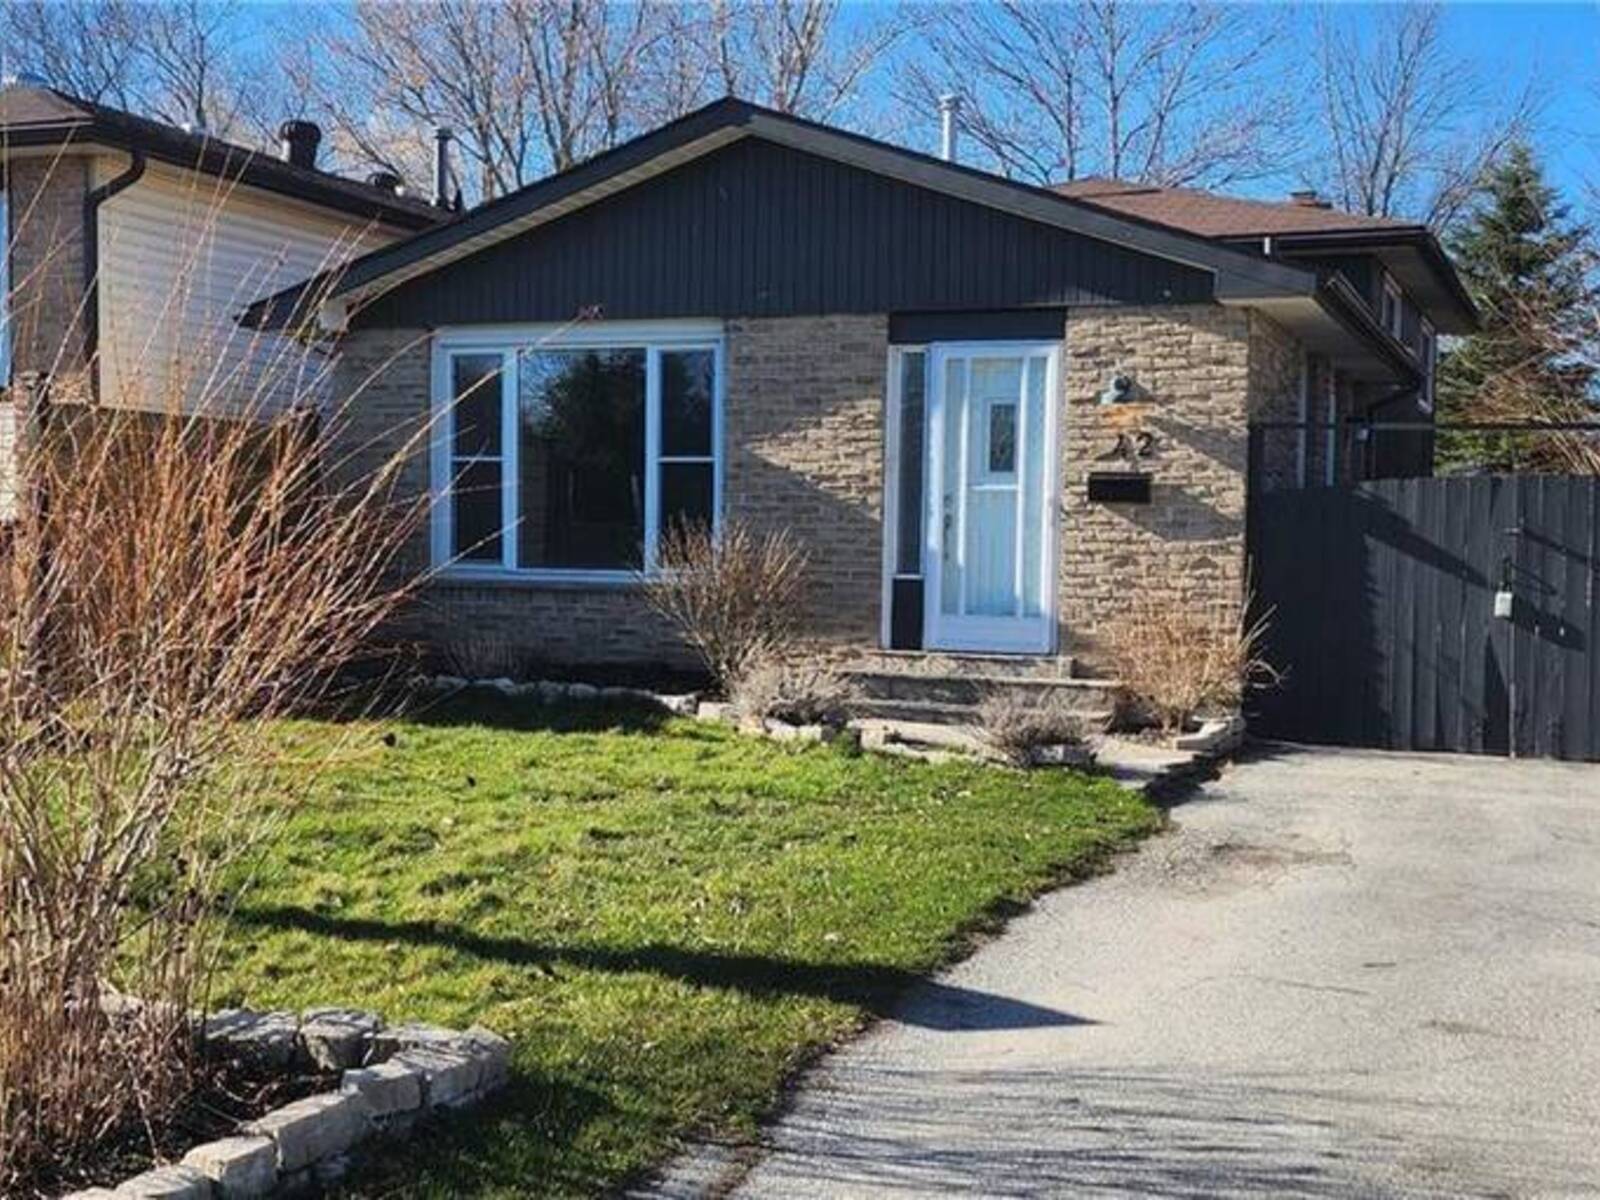 42 COURTICE Crescent, Collingwood, Ontario L9Y 4G1